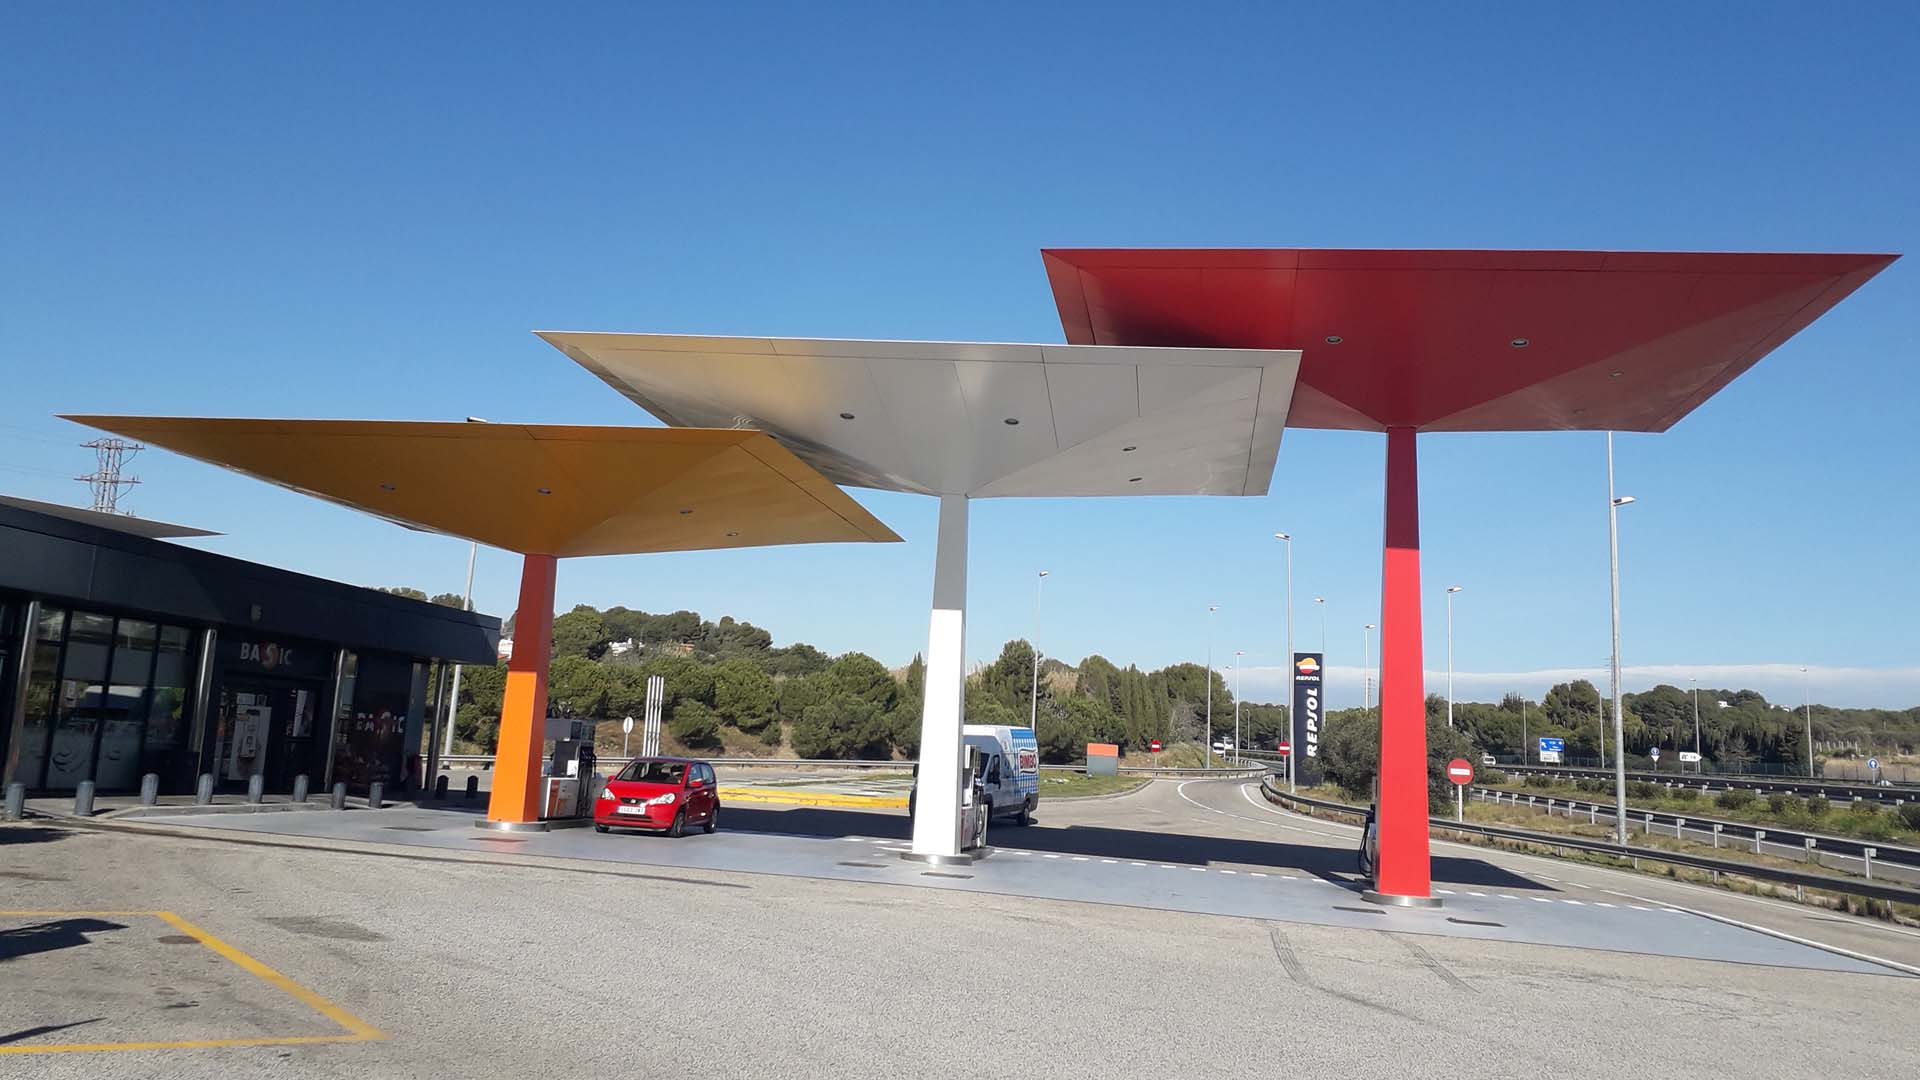 NORMAN FOSTER, REPSOL SERVICE STATION, 2016   